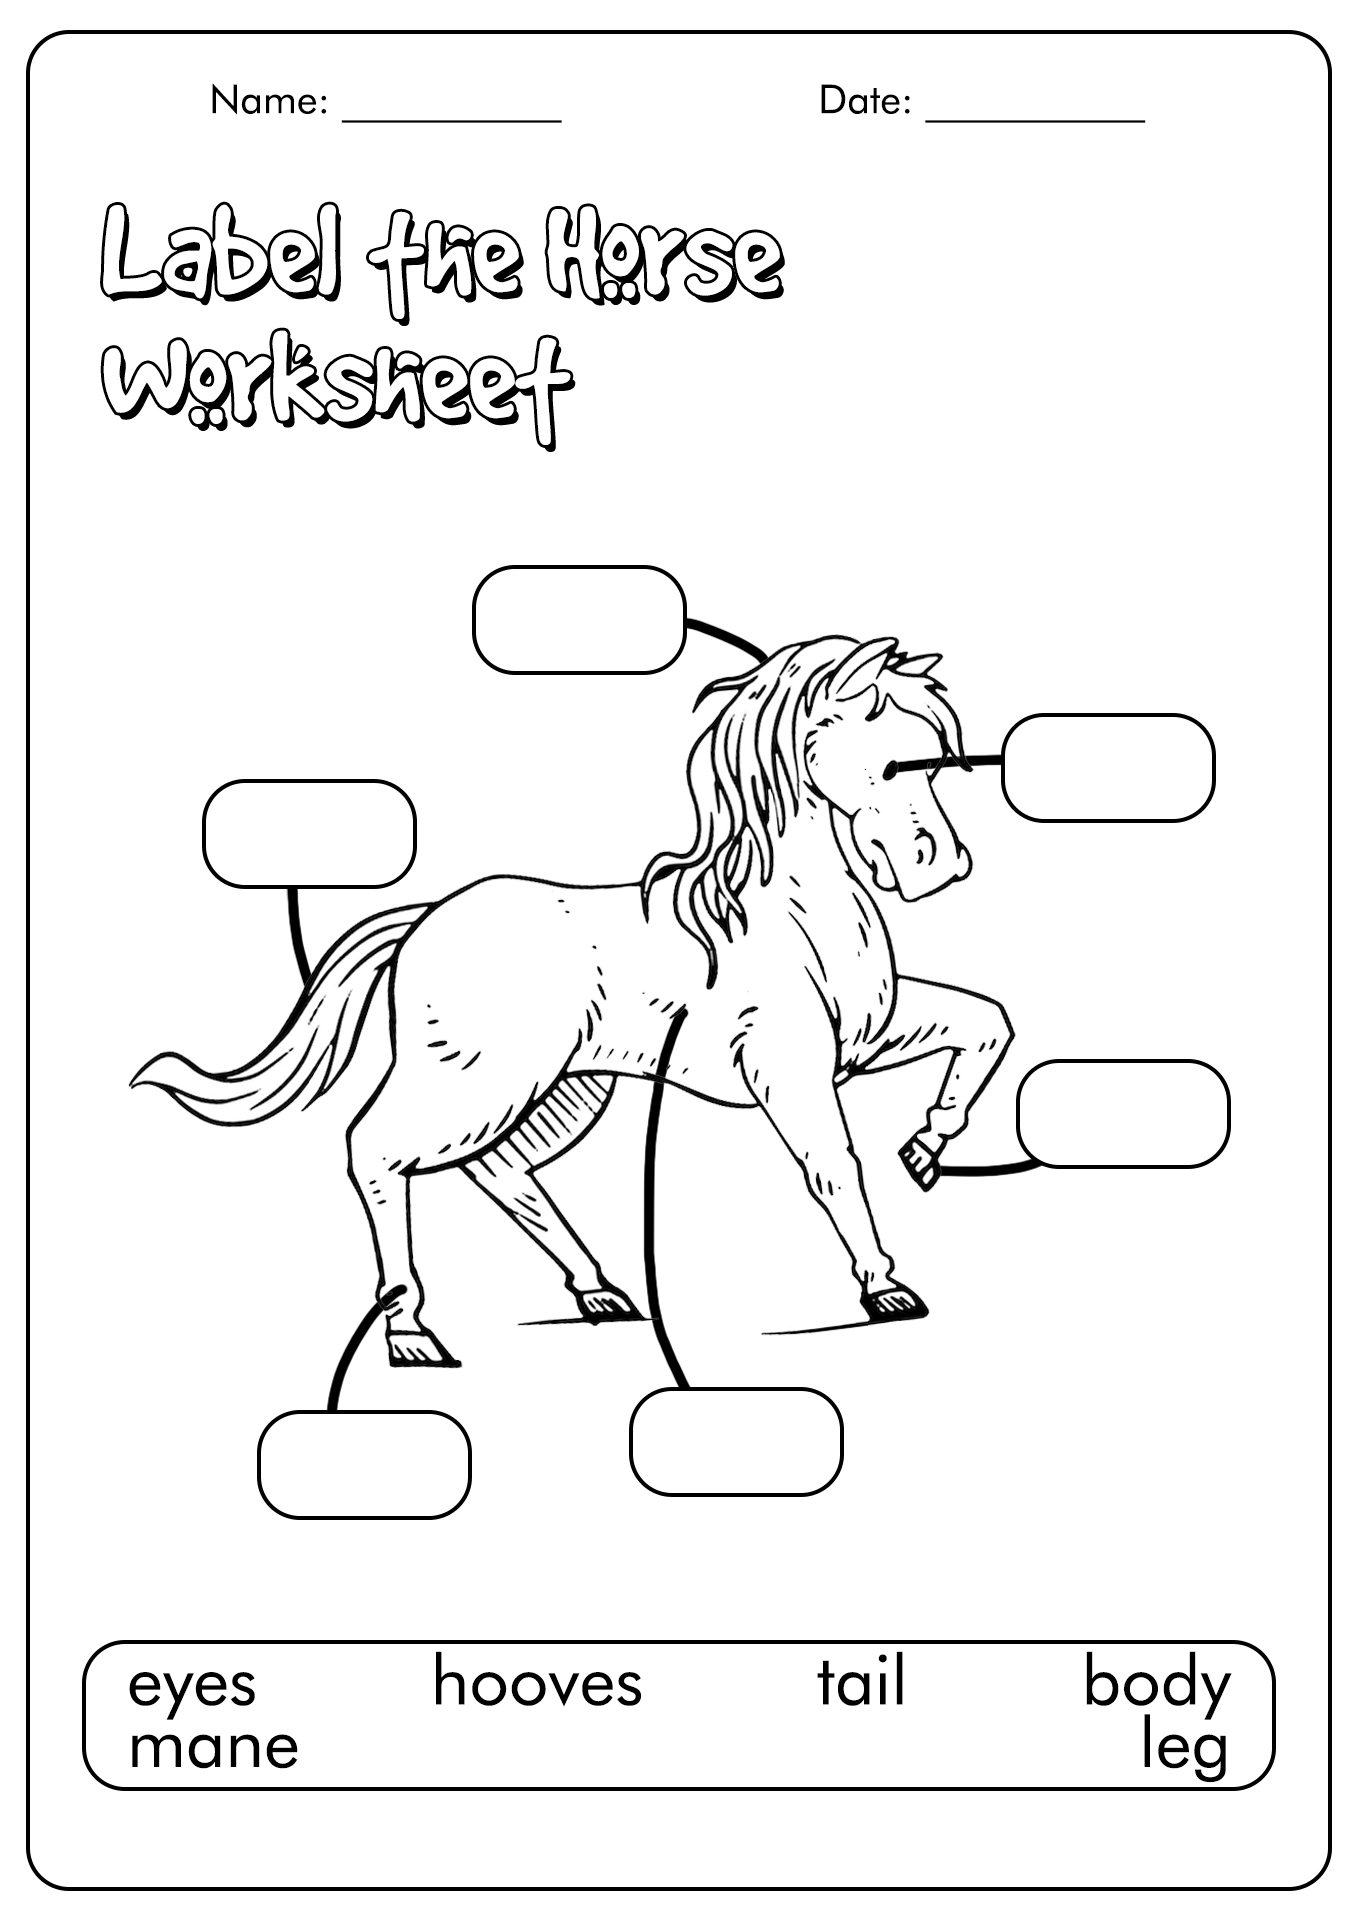 18 Best Images of Horse Study Worksheets - Horse Riding Posture